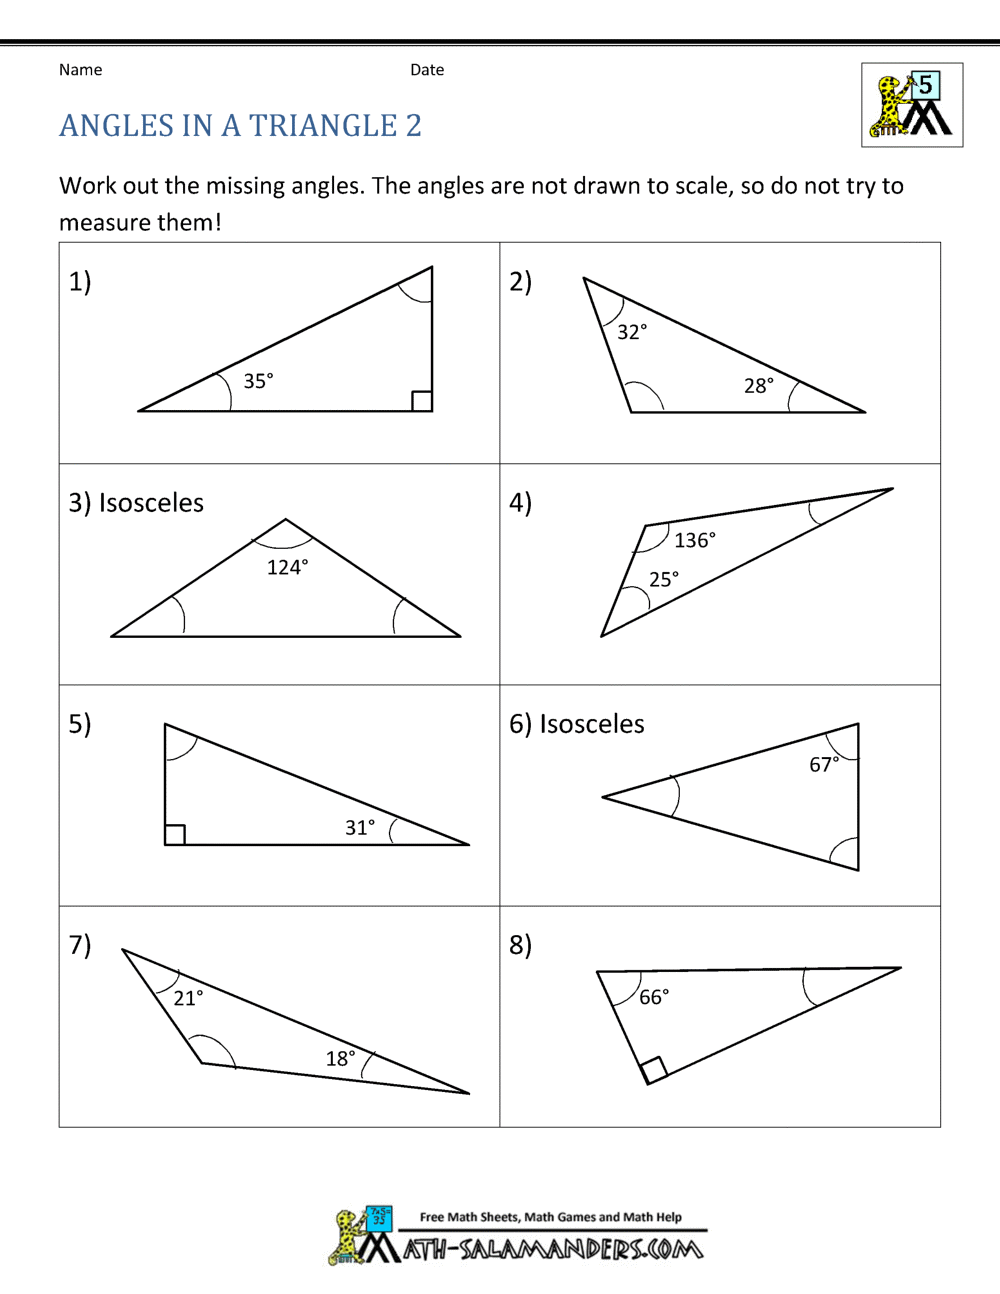 11th Grade Geometry With Regard To Angles In A Triangle Worksheet